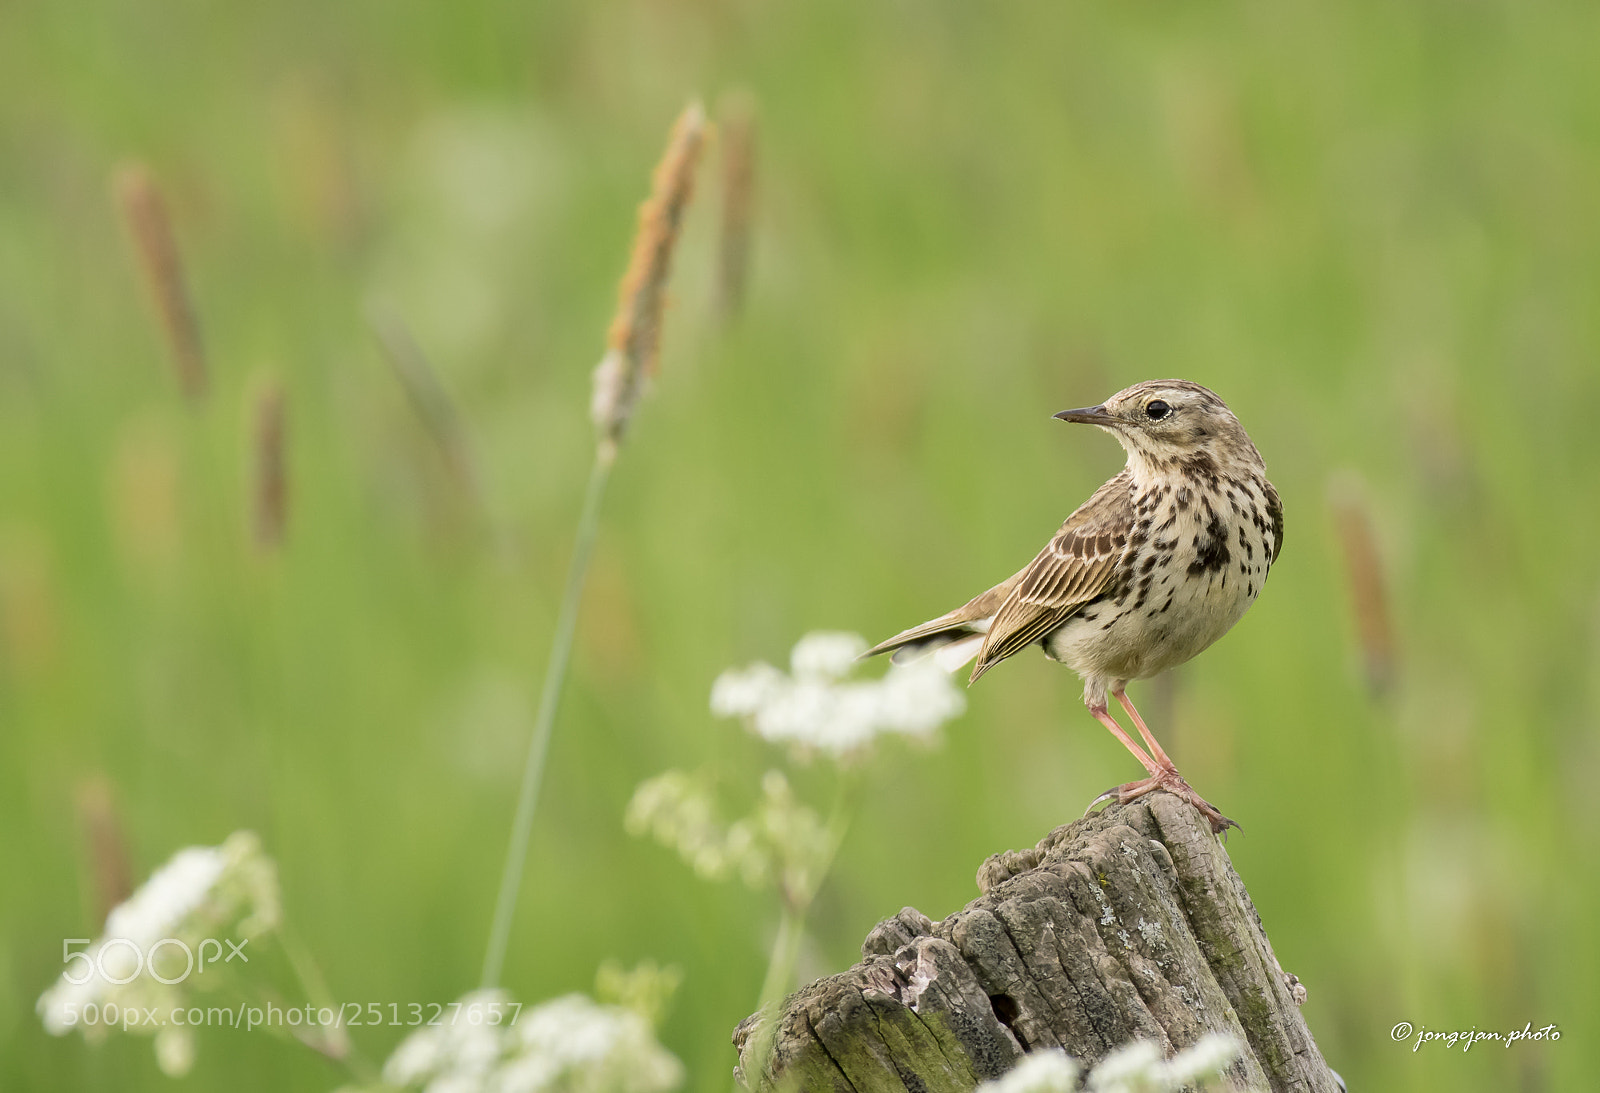 Pentax K-3 II sample photo. Meadow pipit photography